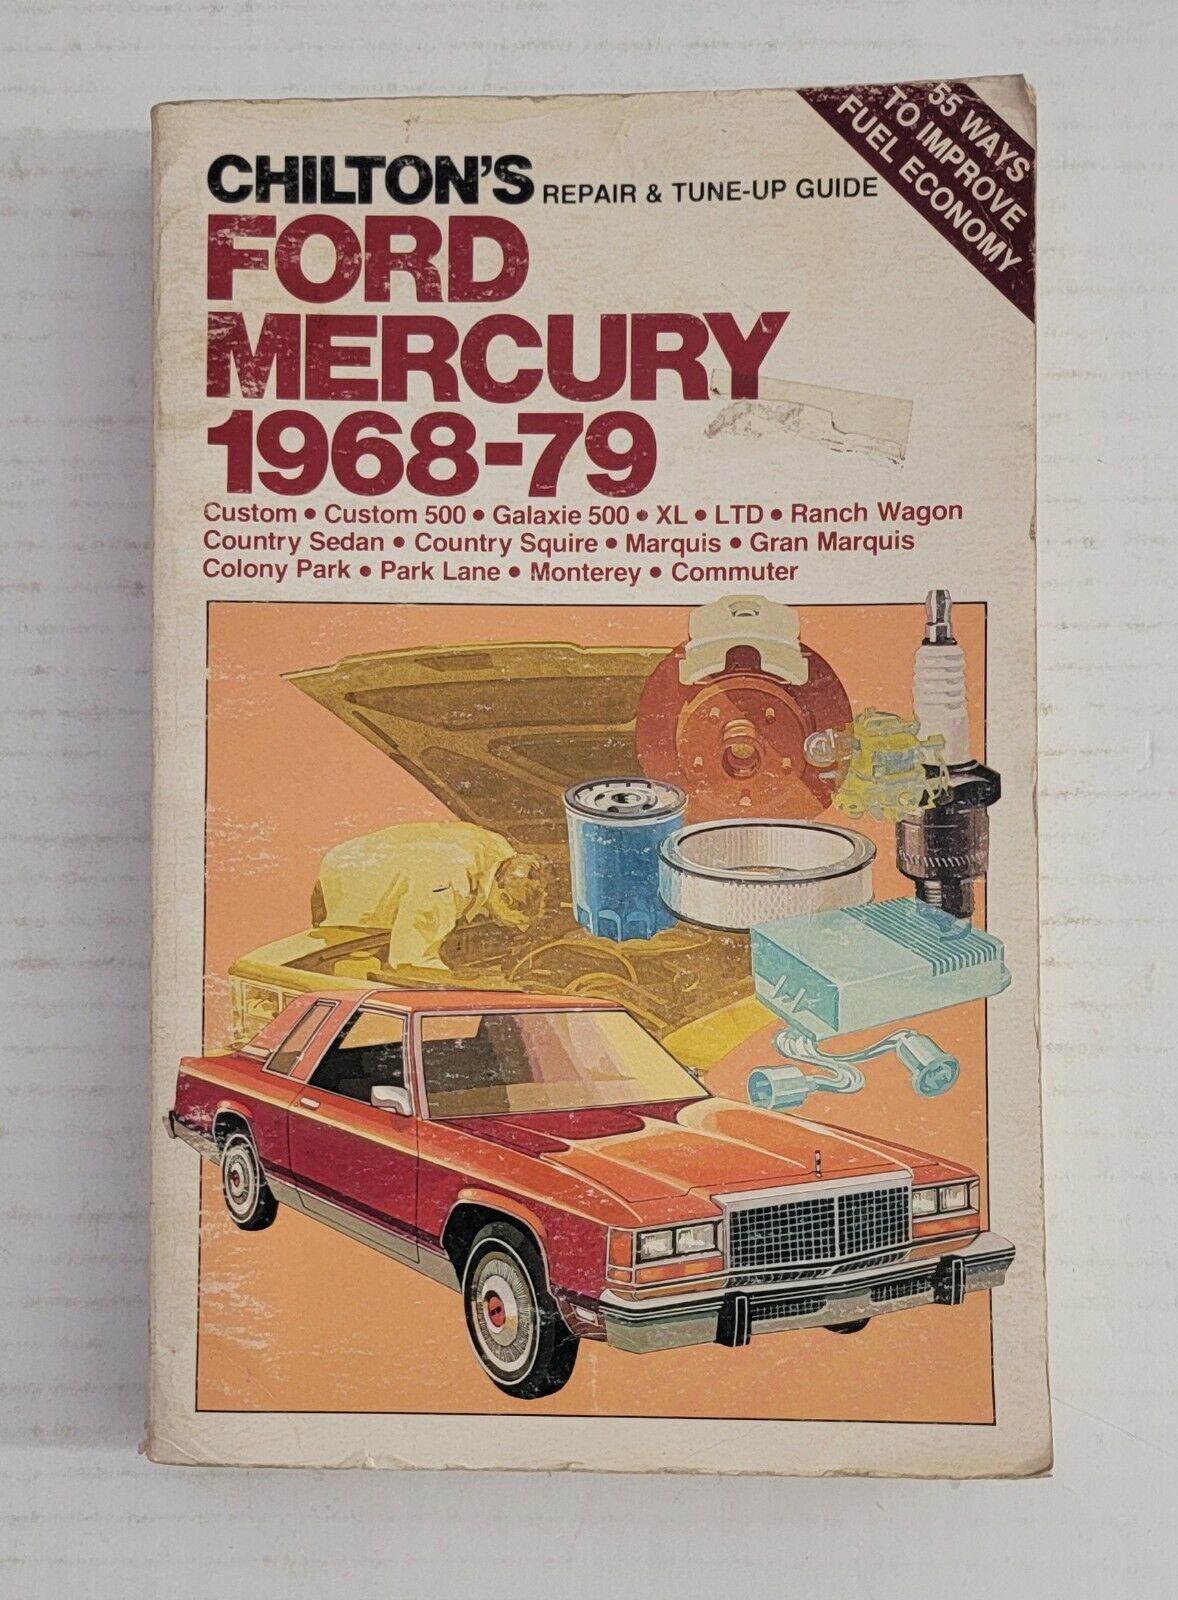 Vintage Chilton\'s Ford Mercury 1968-79 Repair & Tune-Up Guide 